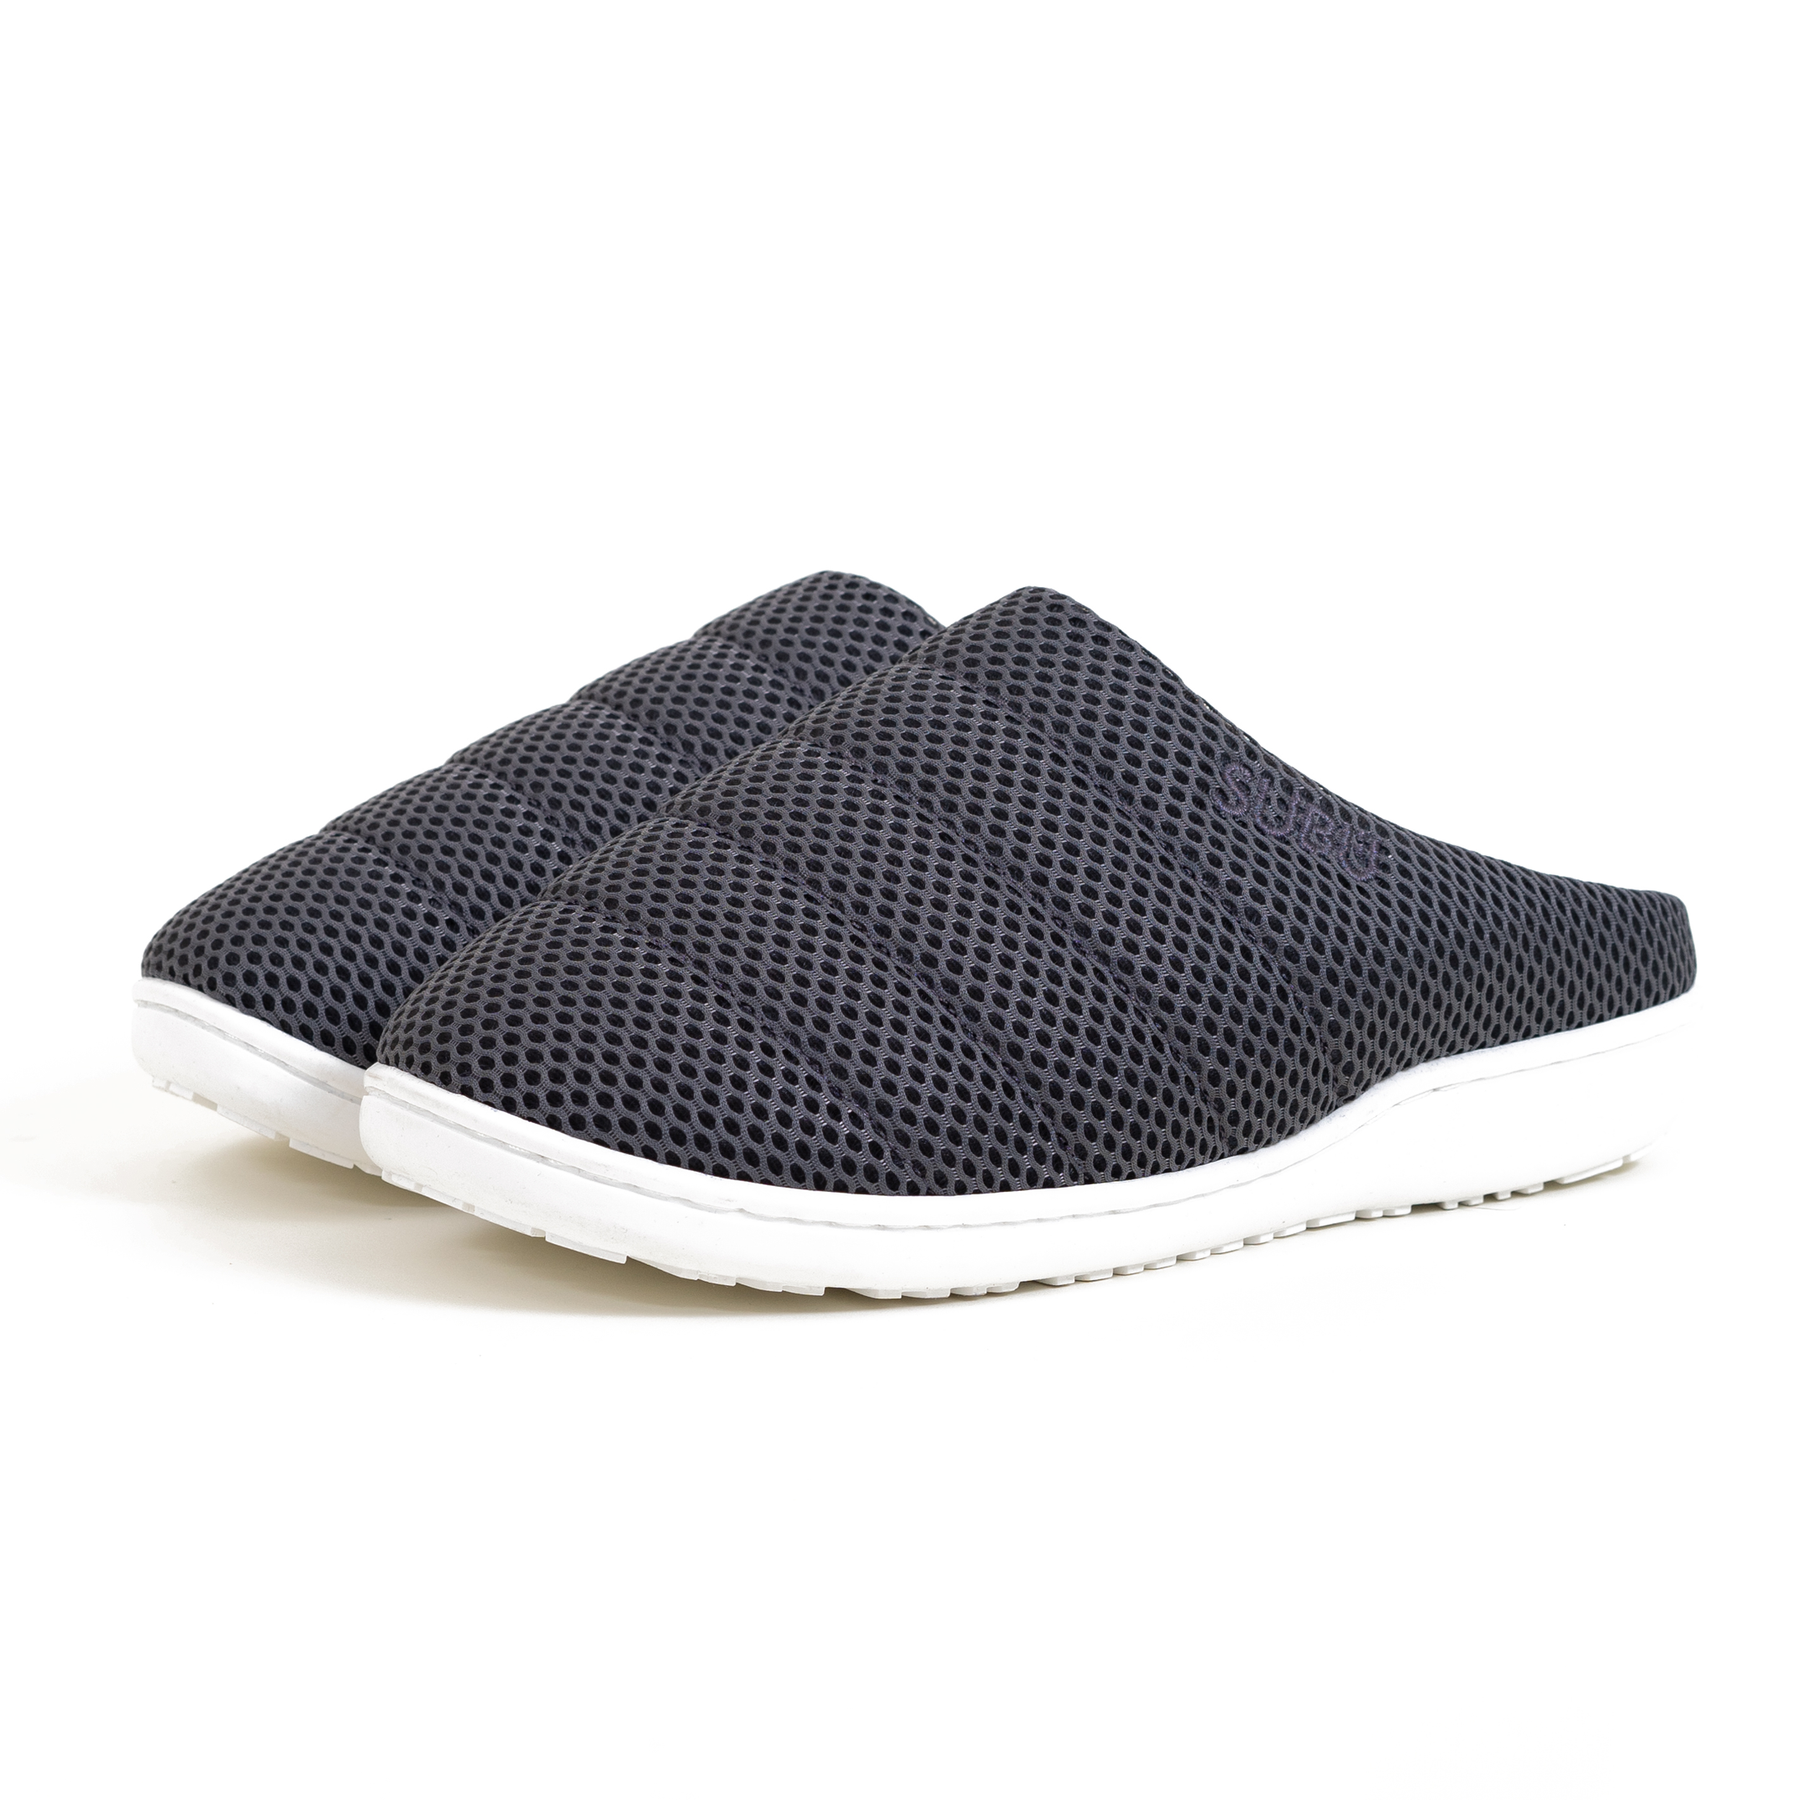 SUBU, Light Summer Slippers Charcoal Black, Size, 0, Slippers,